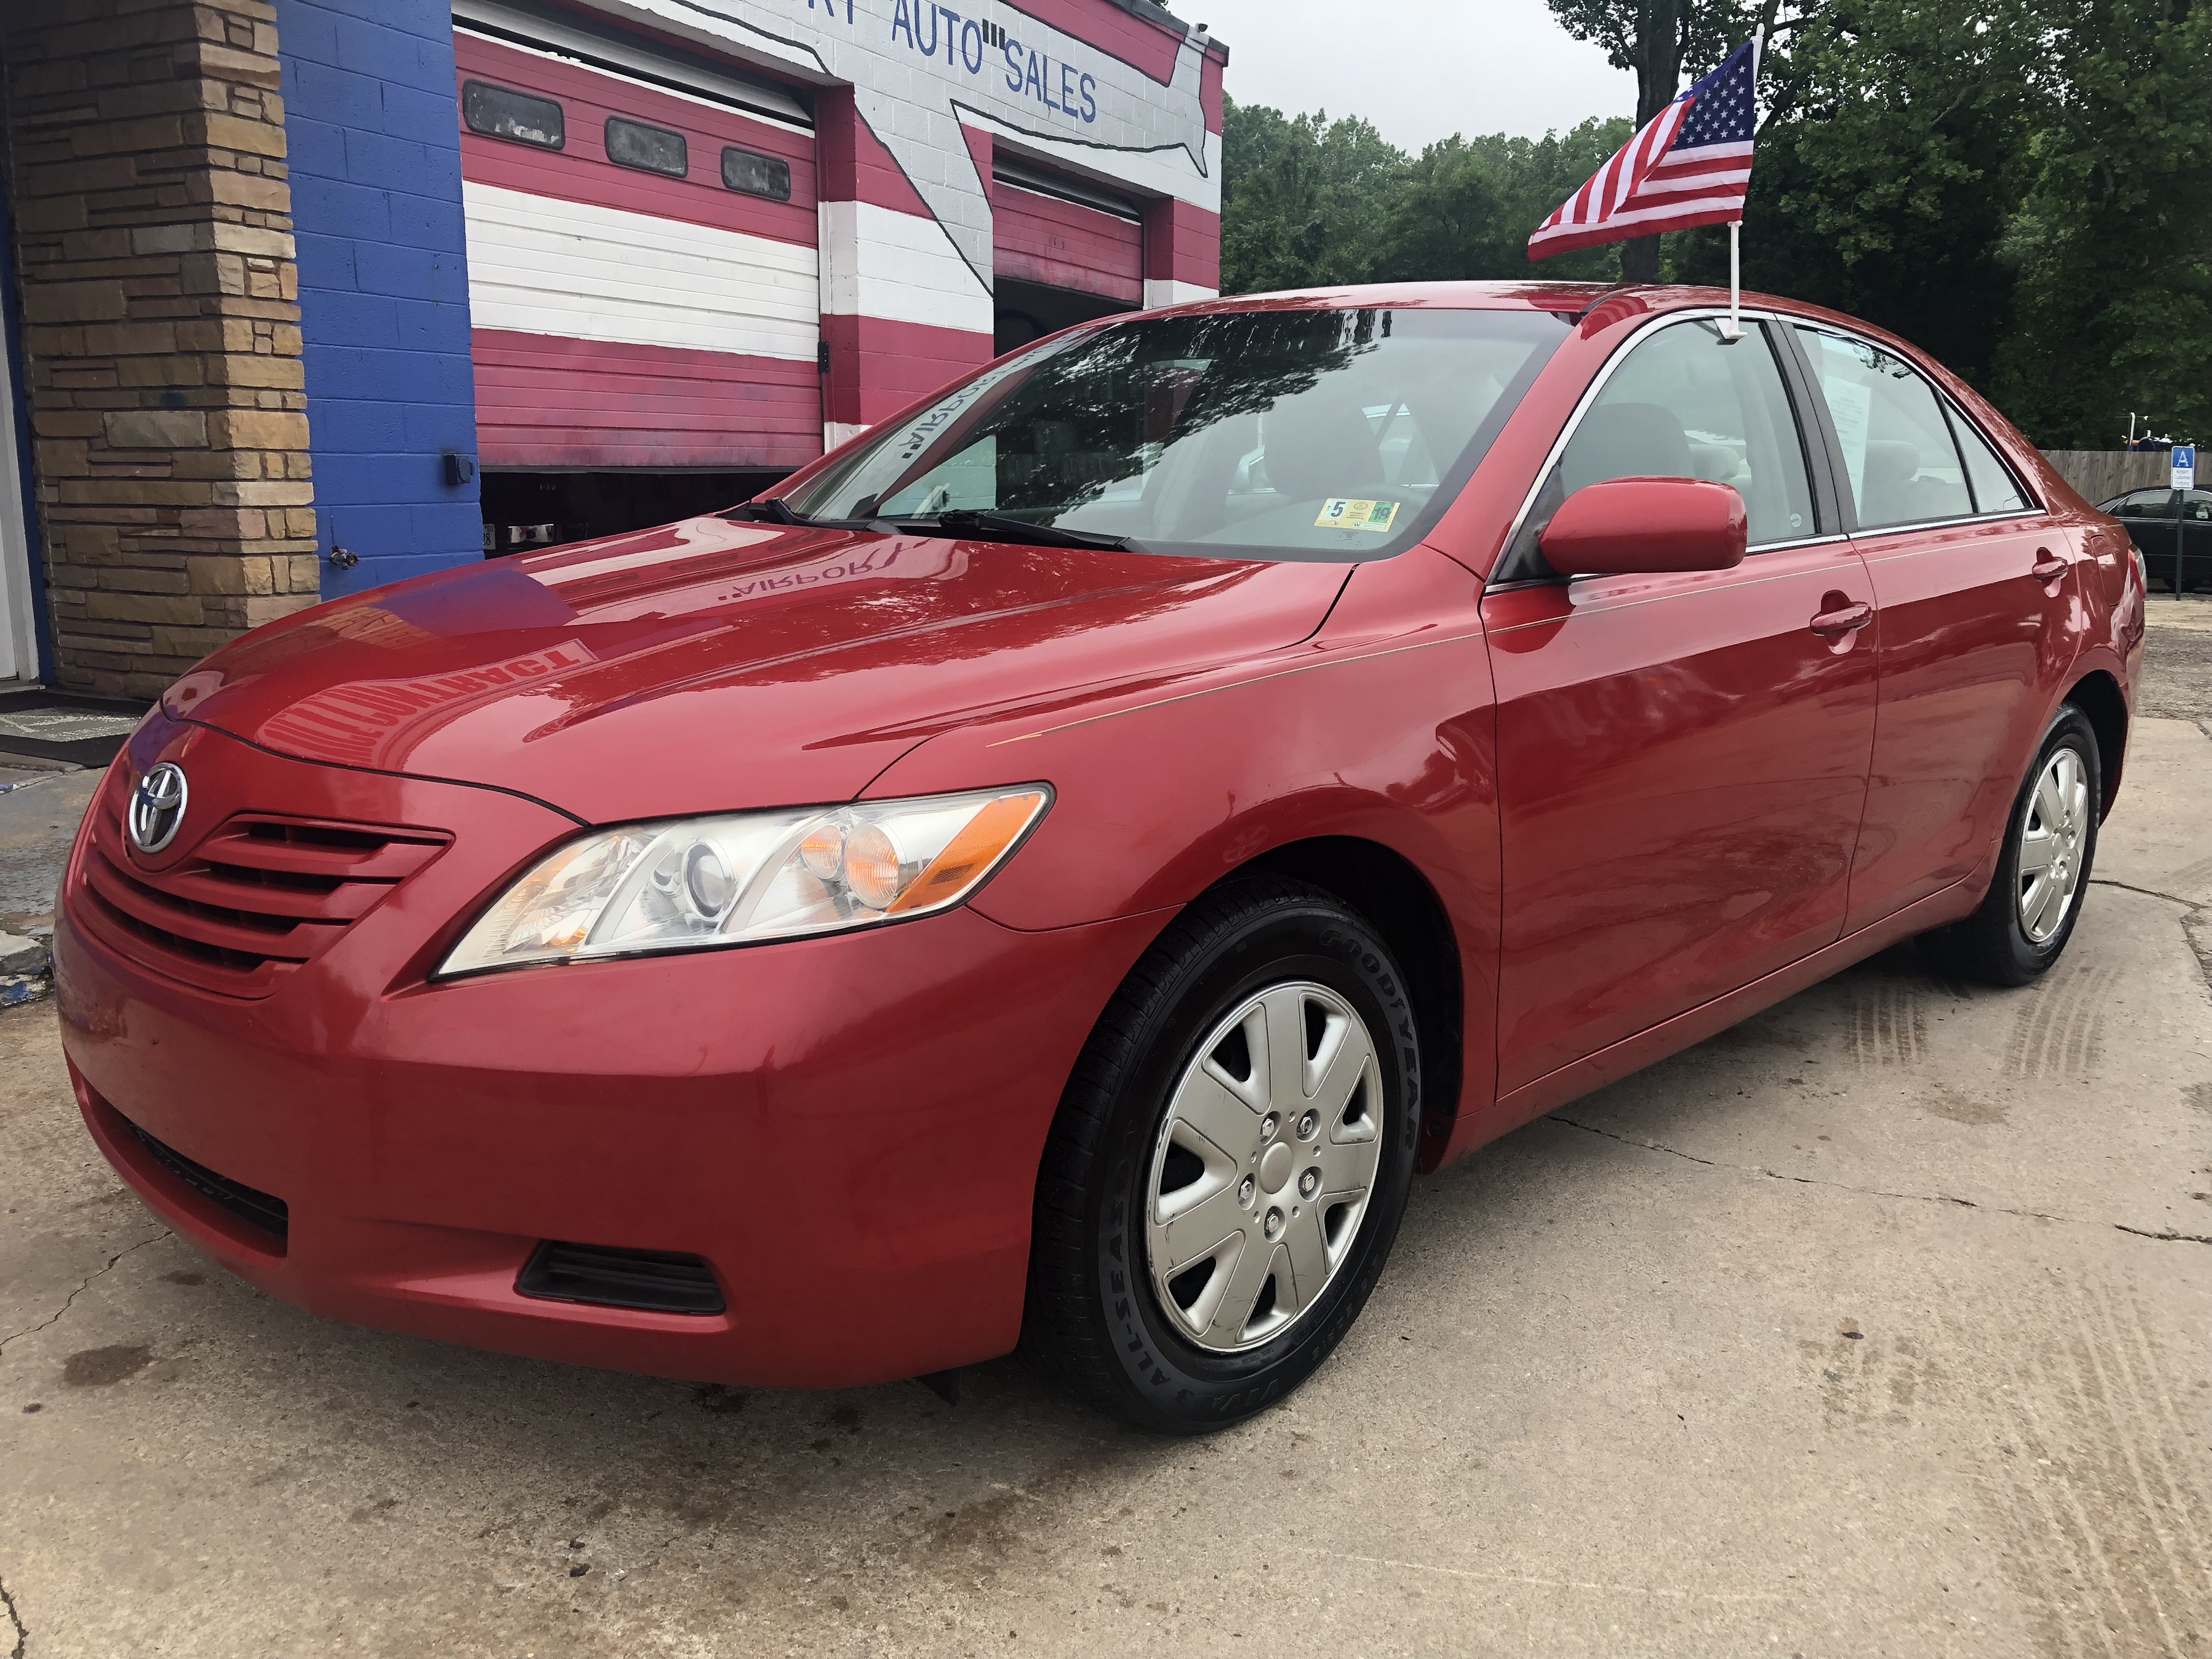 Buy Used Cars in Virginia - 2009 Toyota Camry LE - Used Cars for Sale, VA